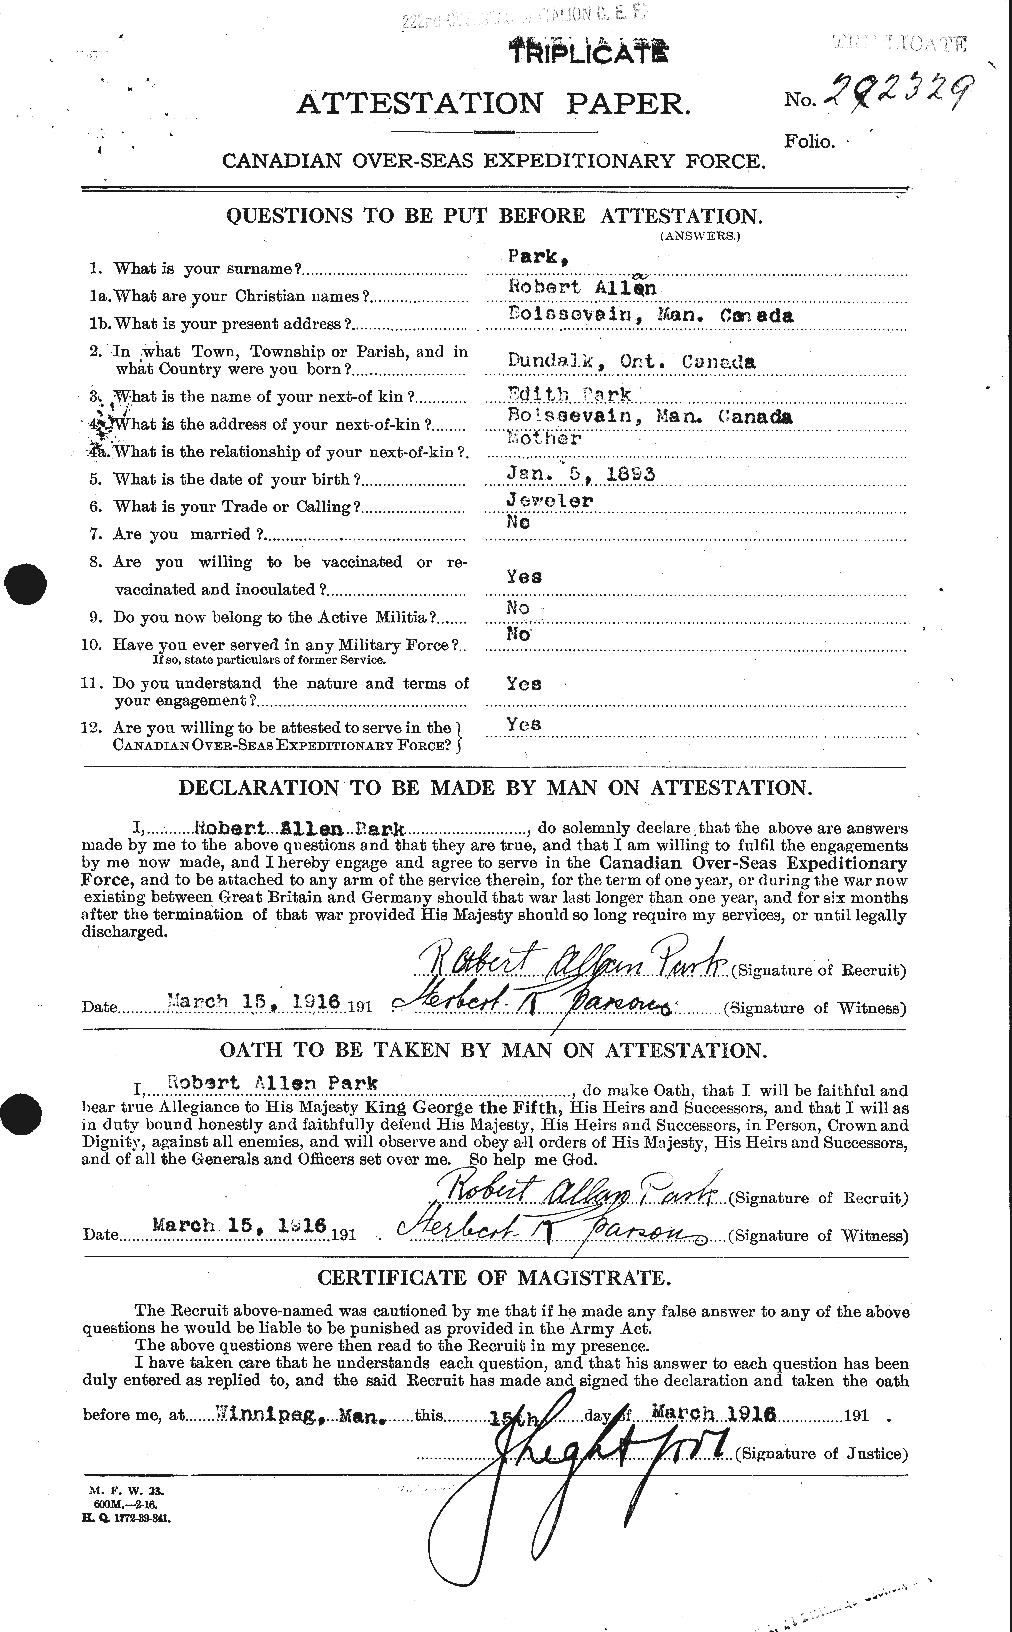 Personnel Records of the First World War - CEF 564873a